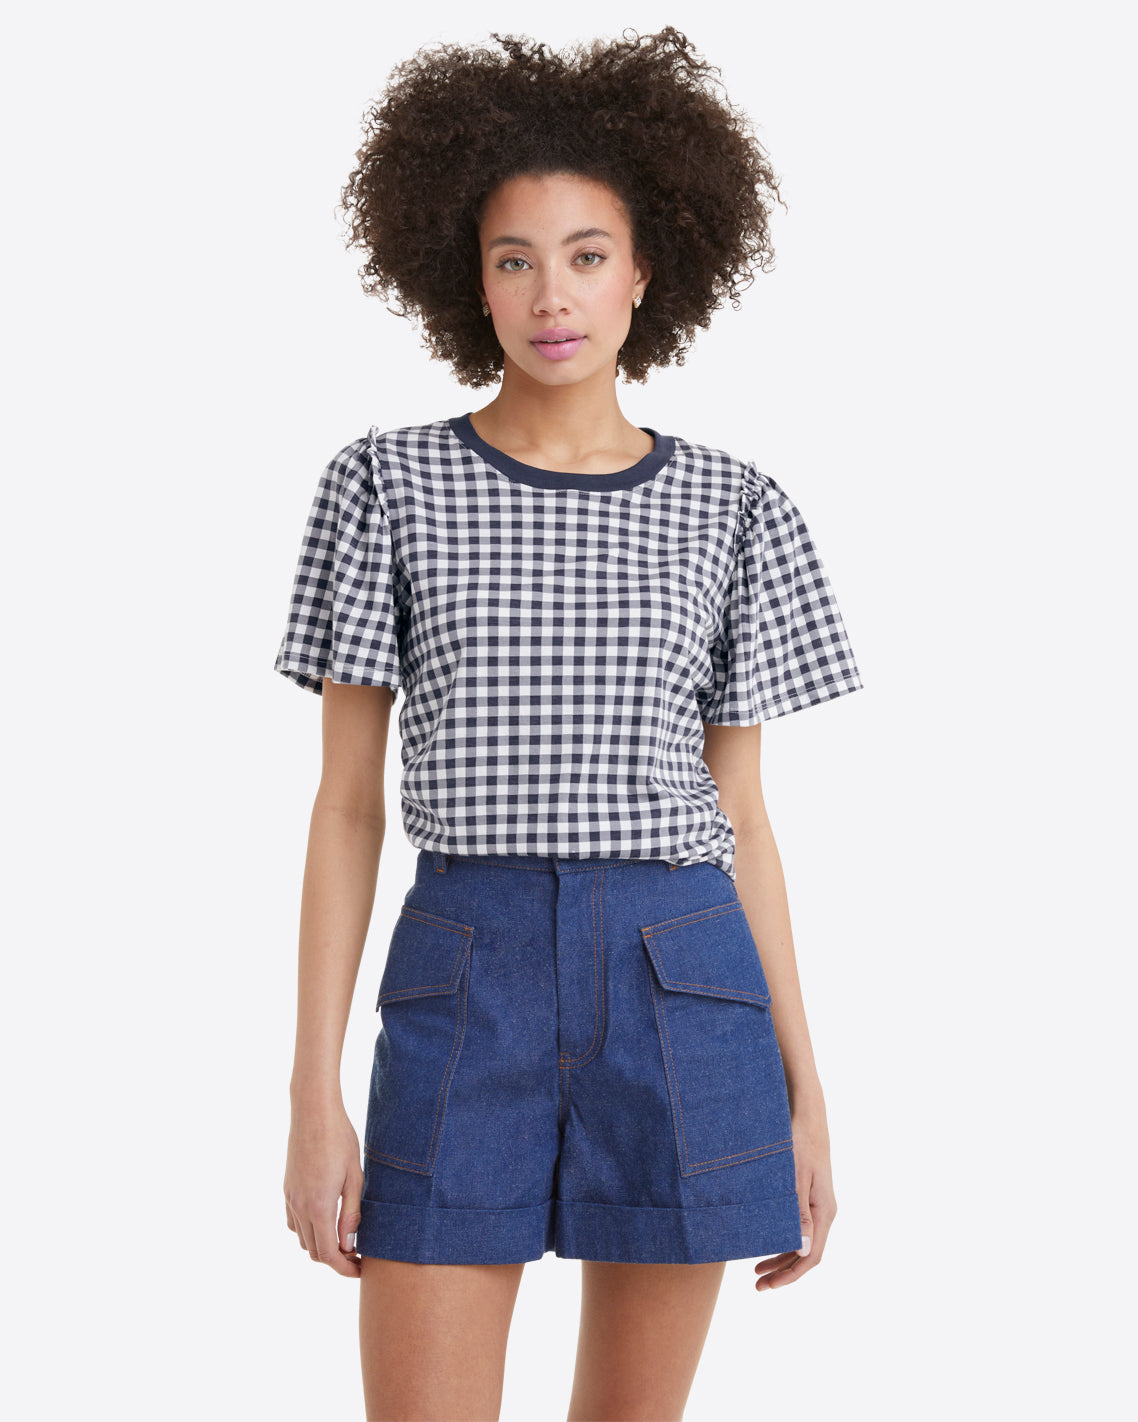 Short Sleeve Easy Knit Top in Gingham